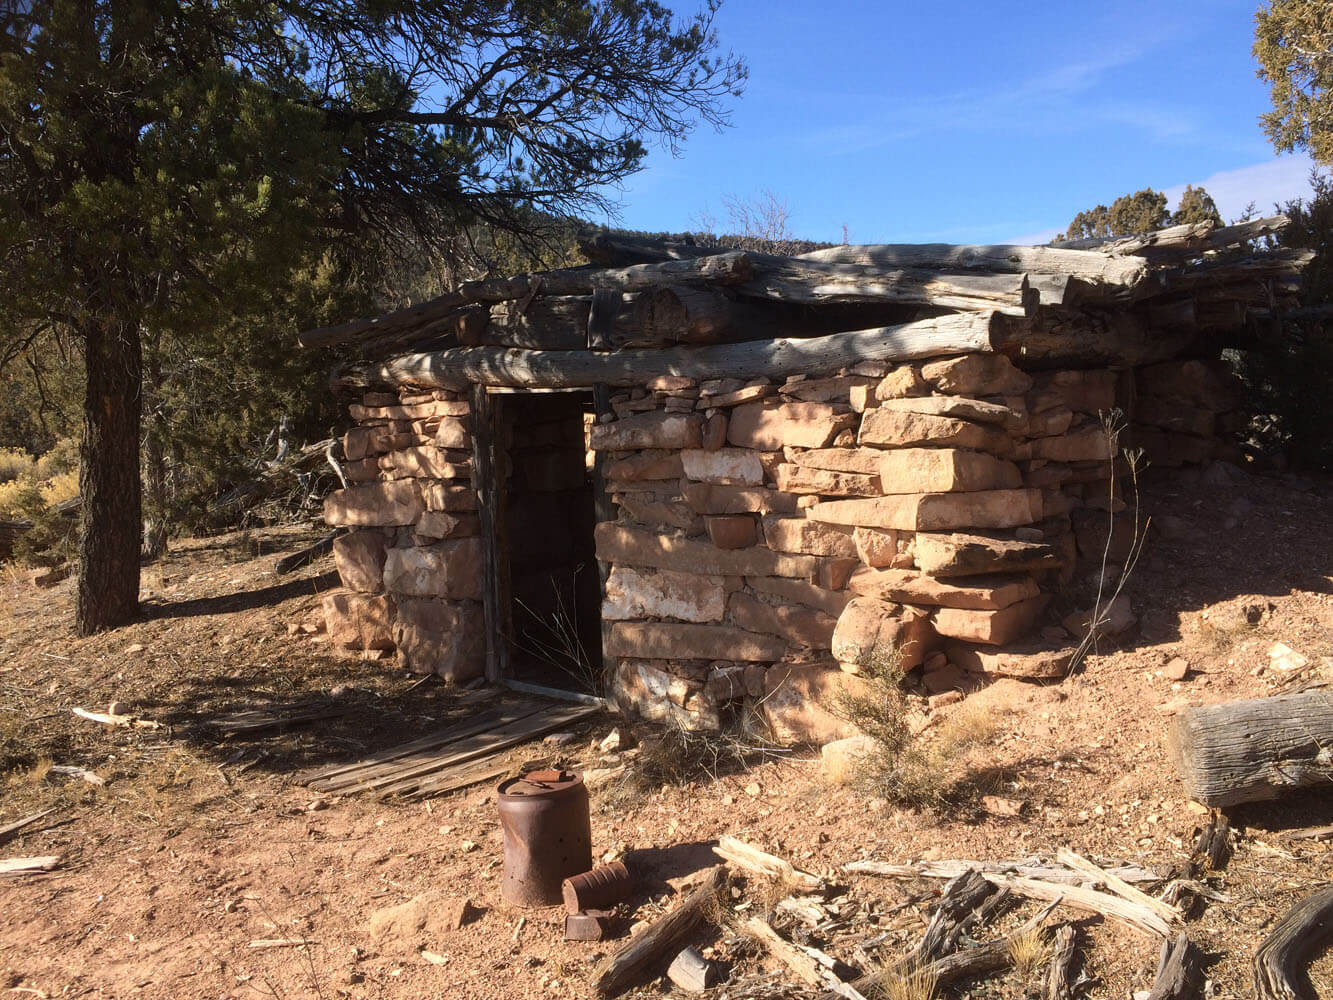 One of the remaining stone Cabins at Calamity camp.